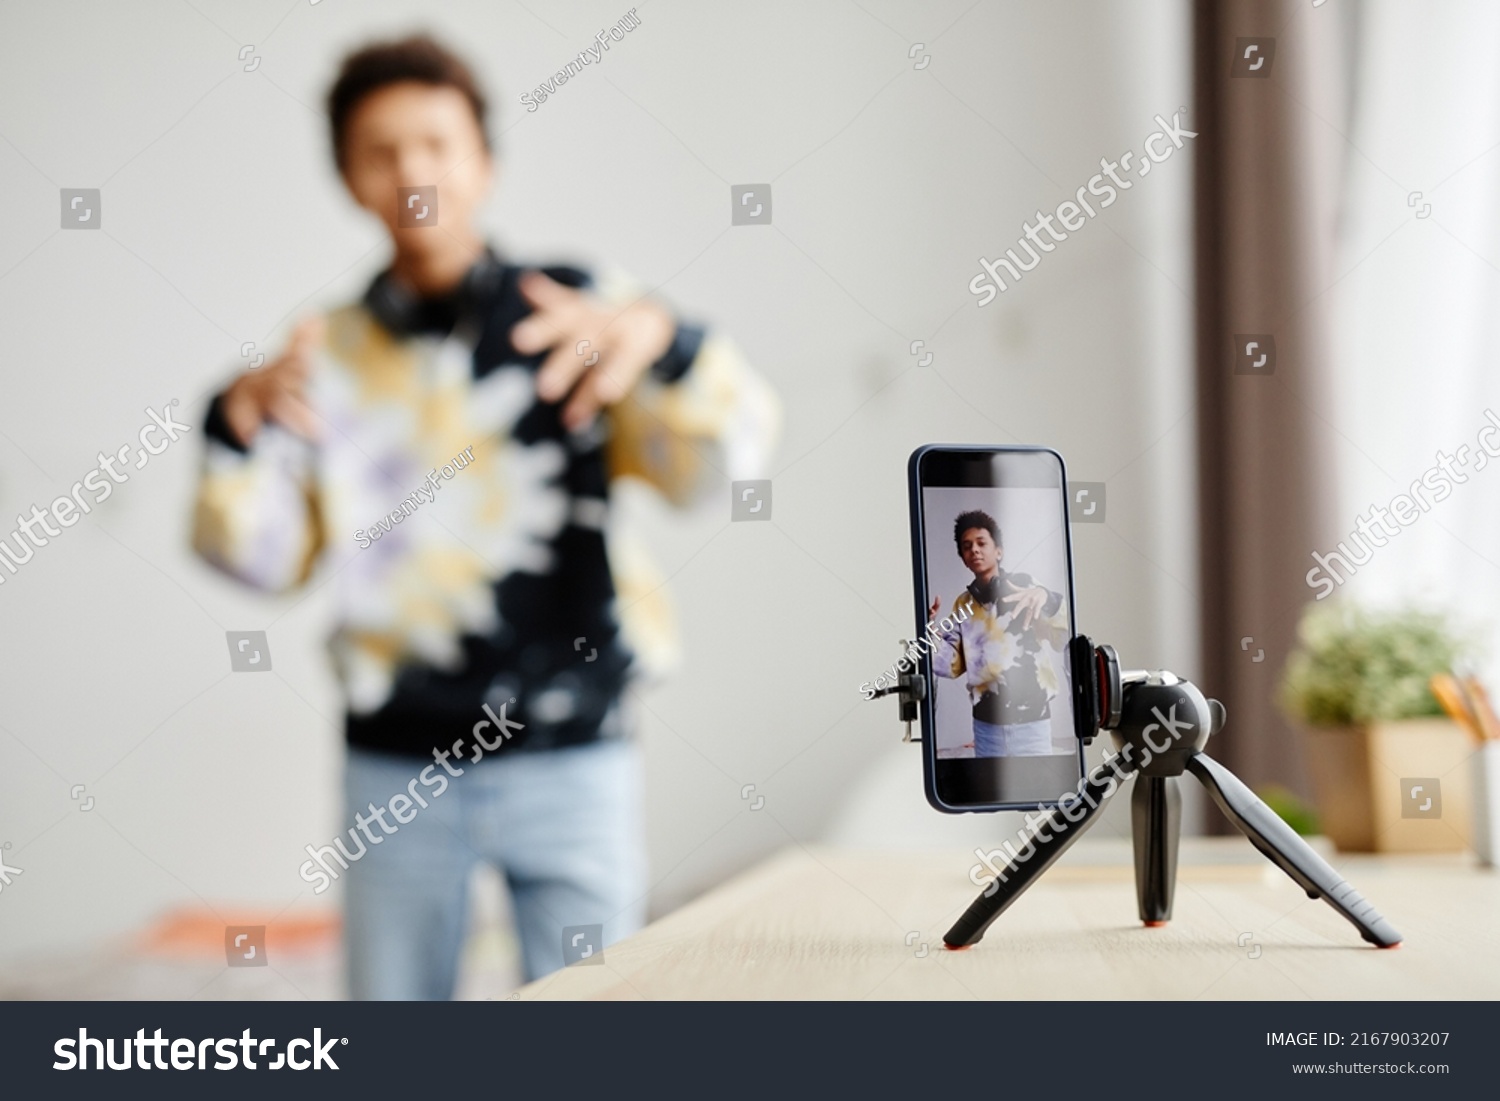 Background image of Gen Z teenager filming video for social media at home, focus on smartphone screen, copy space #2167903207